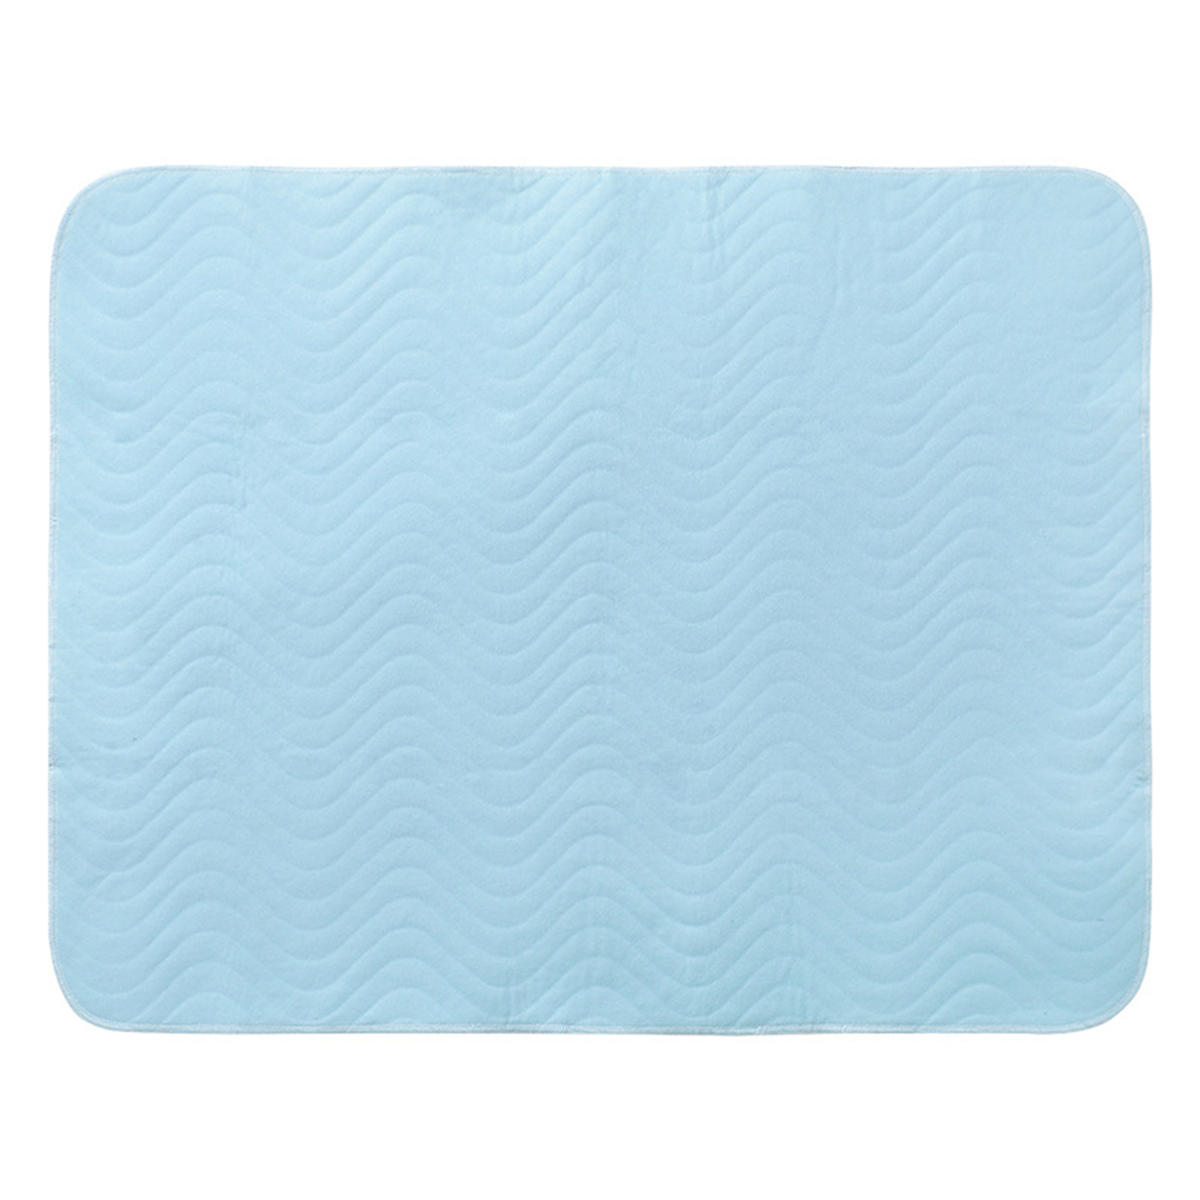 

27 x 35.4'' Washable Reusable Waterproof Underpad Incontinence Bed Pad Kids Adult Baby Diapers